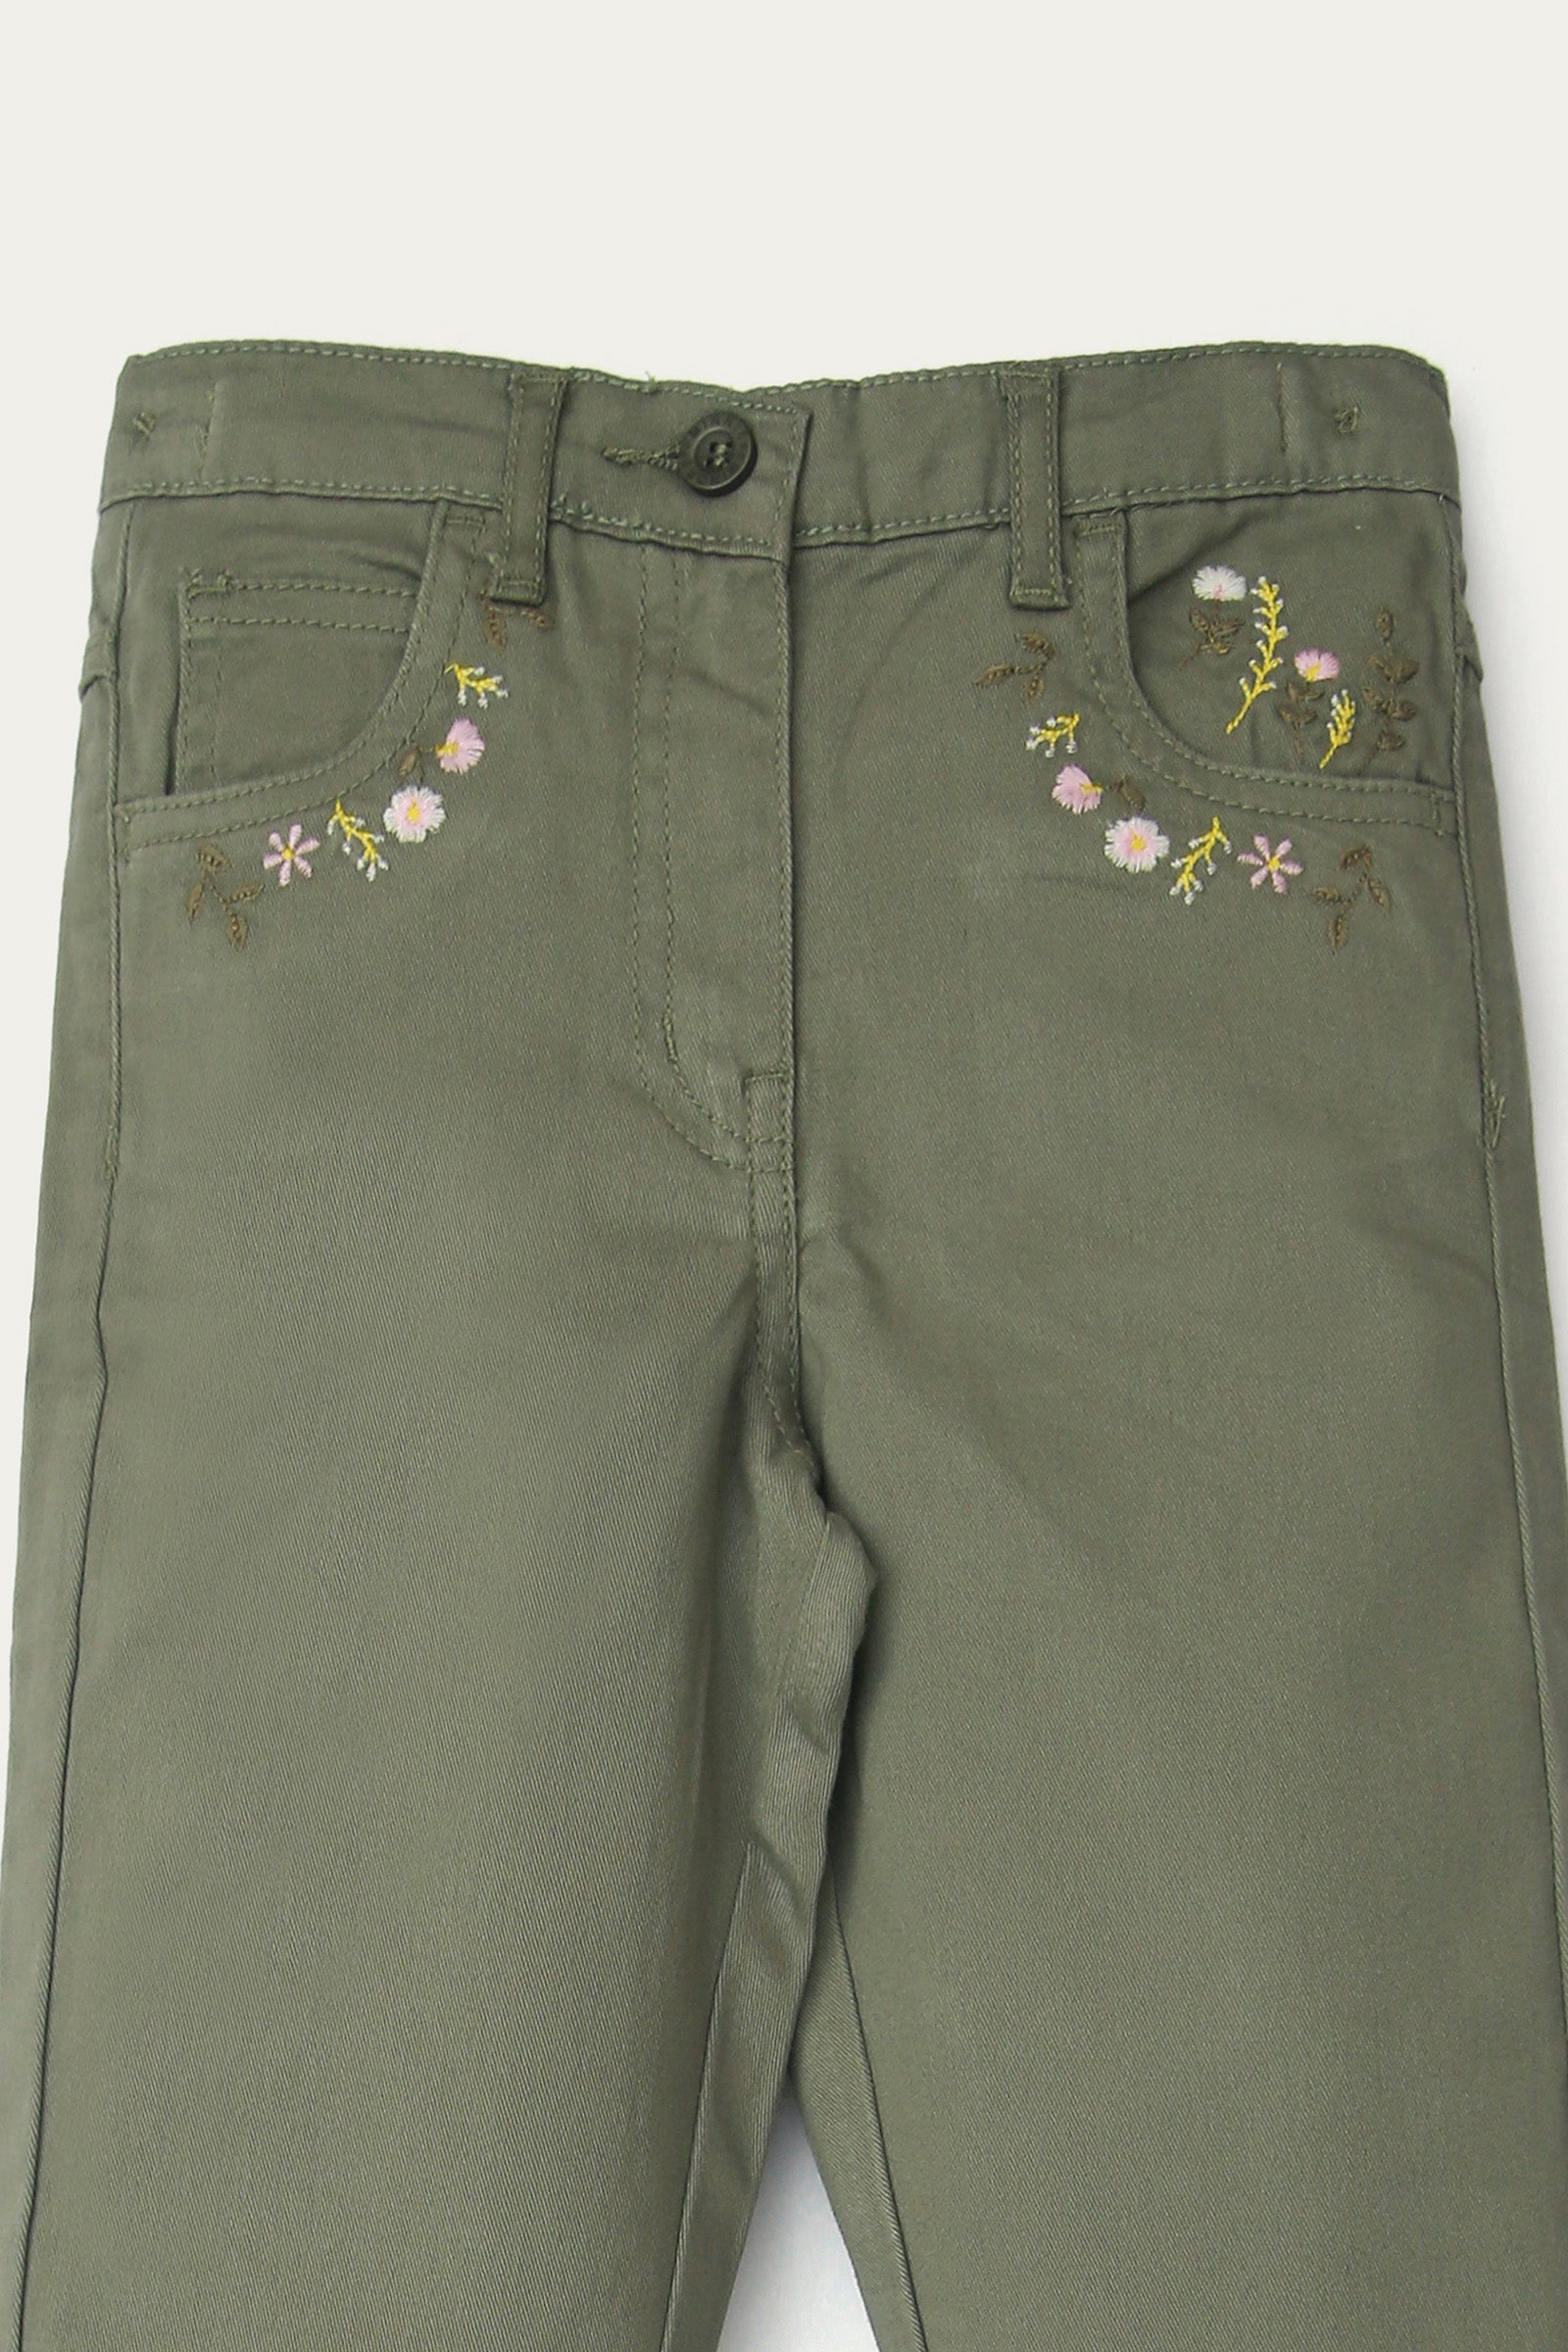 Embroidered Pants (GT-366)